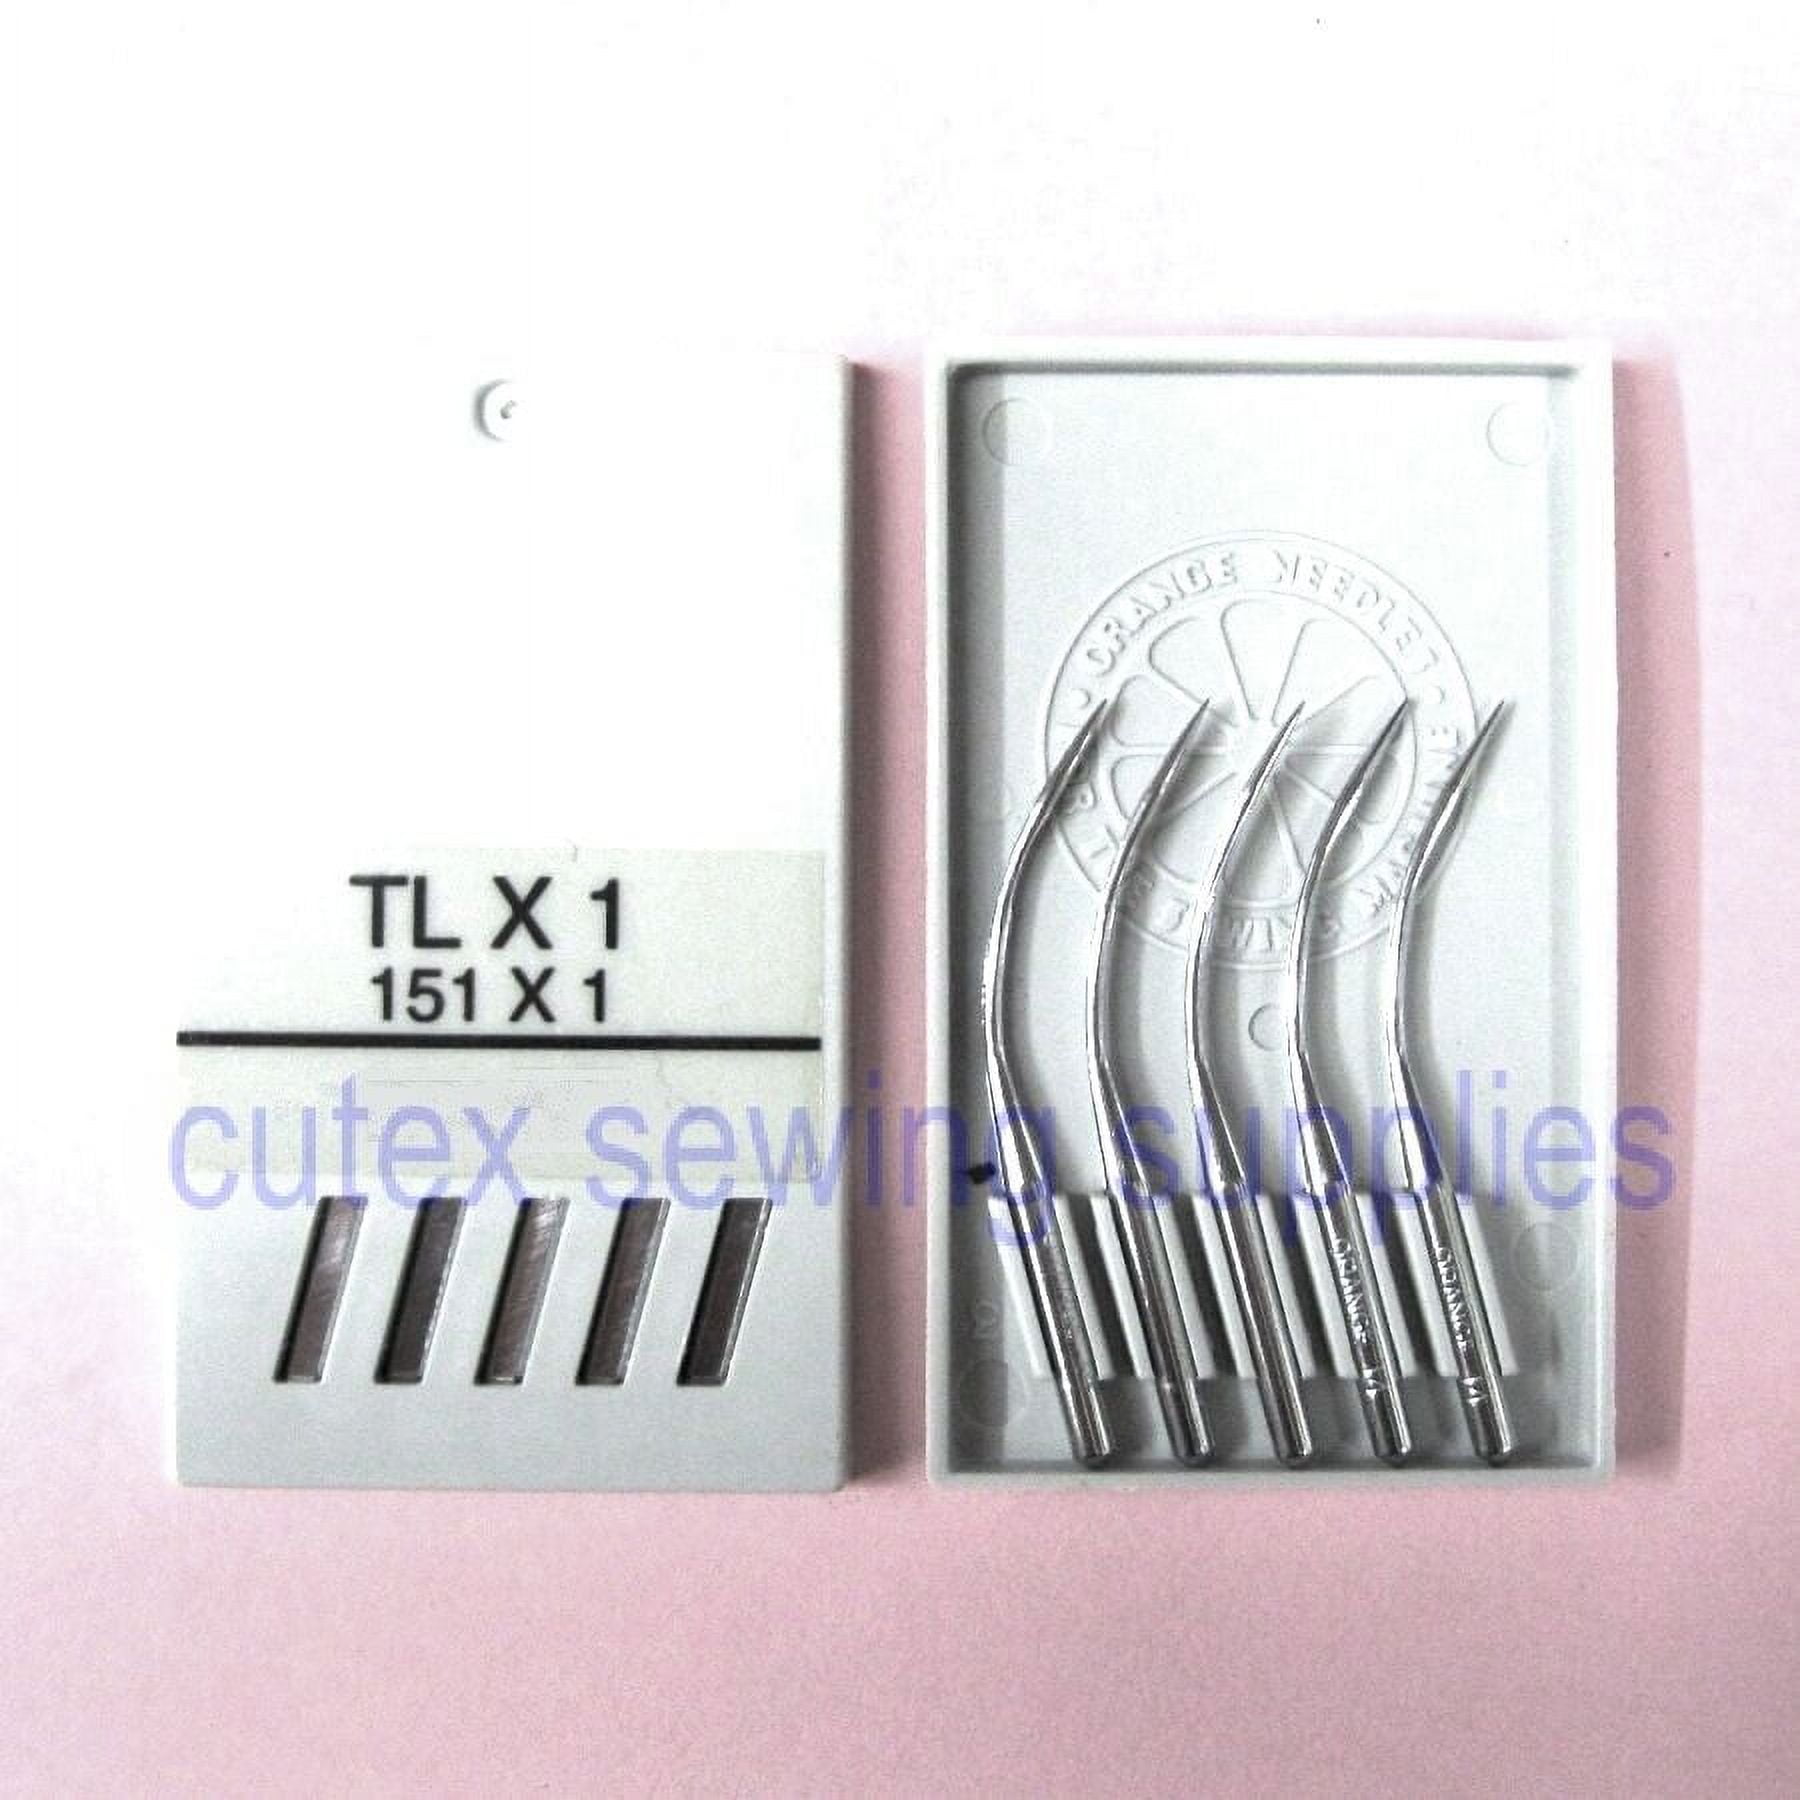 10 Orange 151x1 Tlx1 Curved Sewing Needles for Singer 246, 246k Class Overlock, Size: 11 (Metric 75)